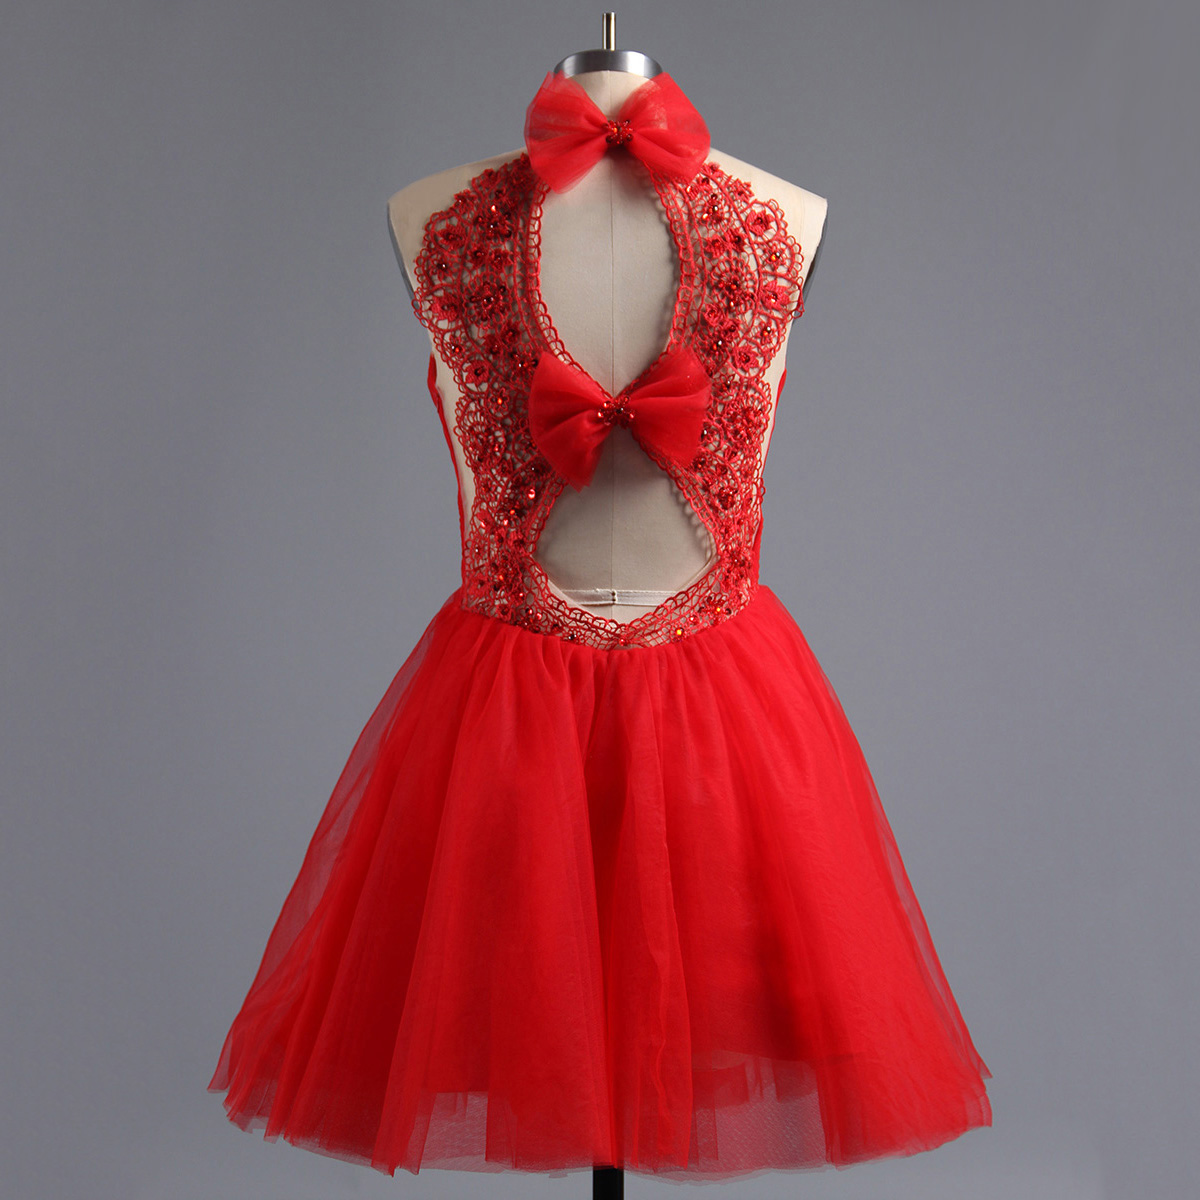 Red Illusion Homecoming Dress With Key Holes Back, Tulle Homecoming Dress With Bowknots, Mini Homecoming Dress With Lace Appliques